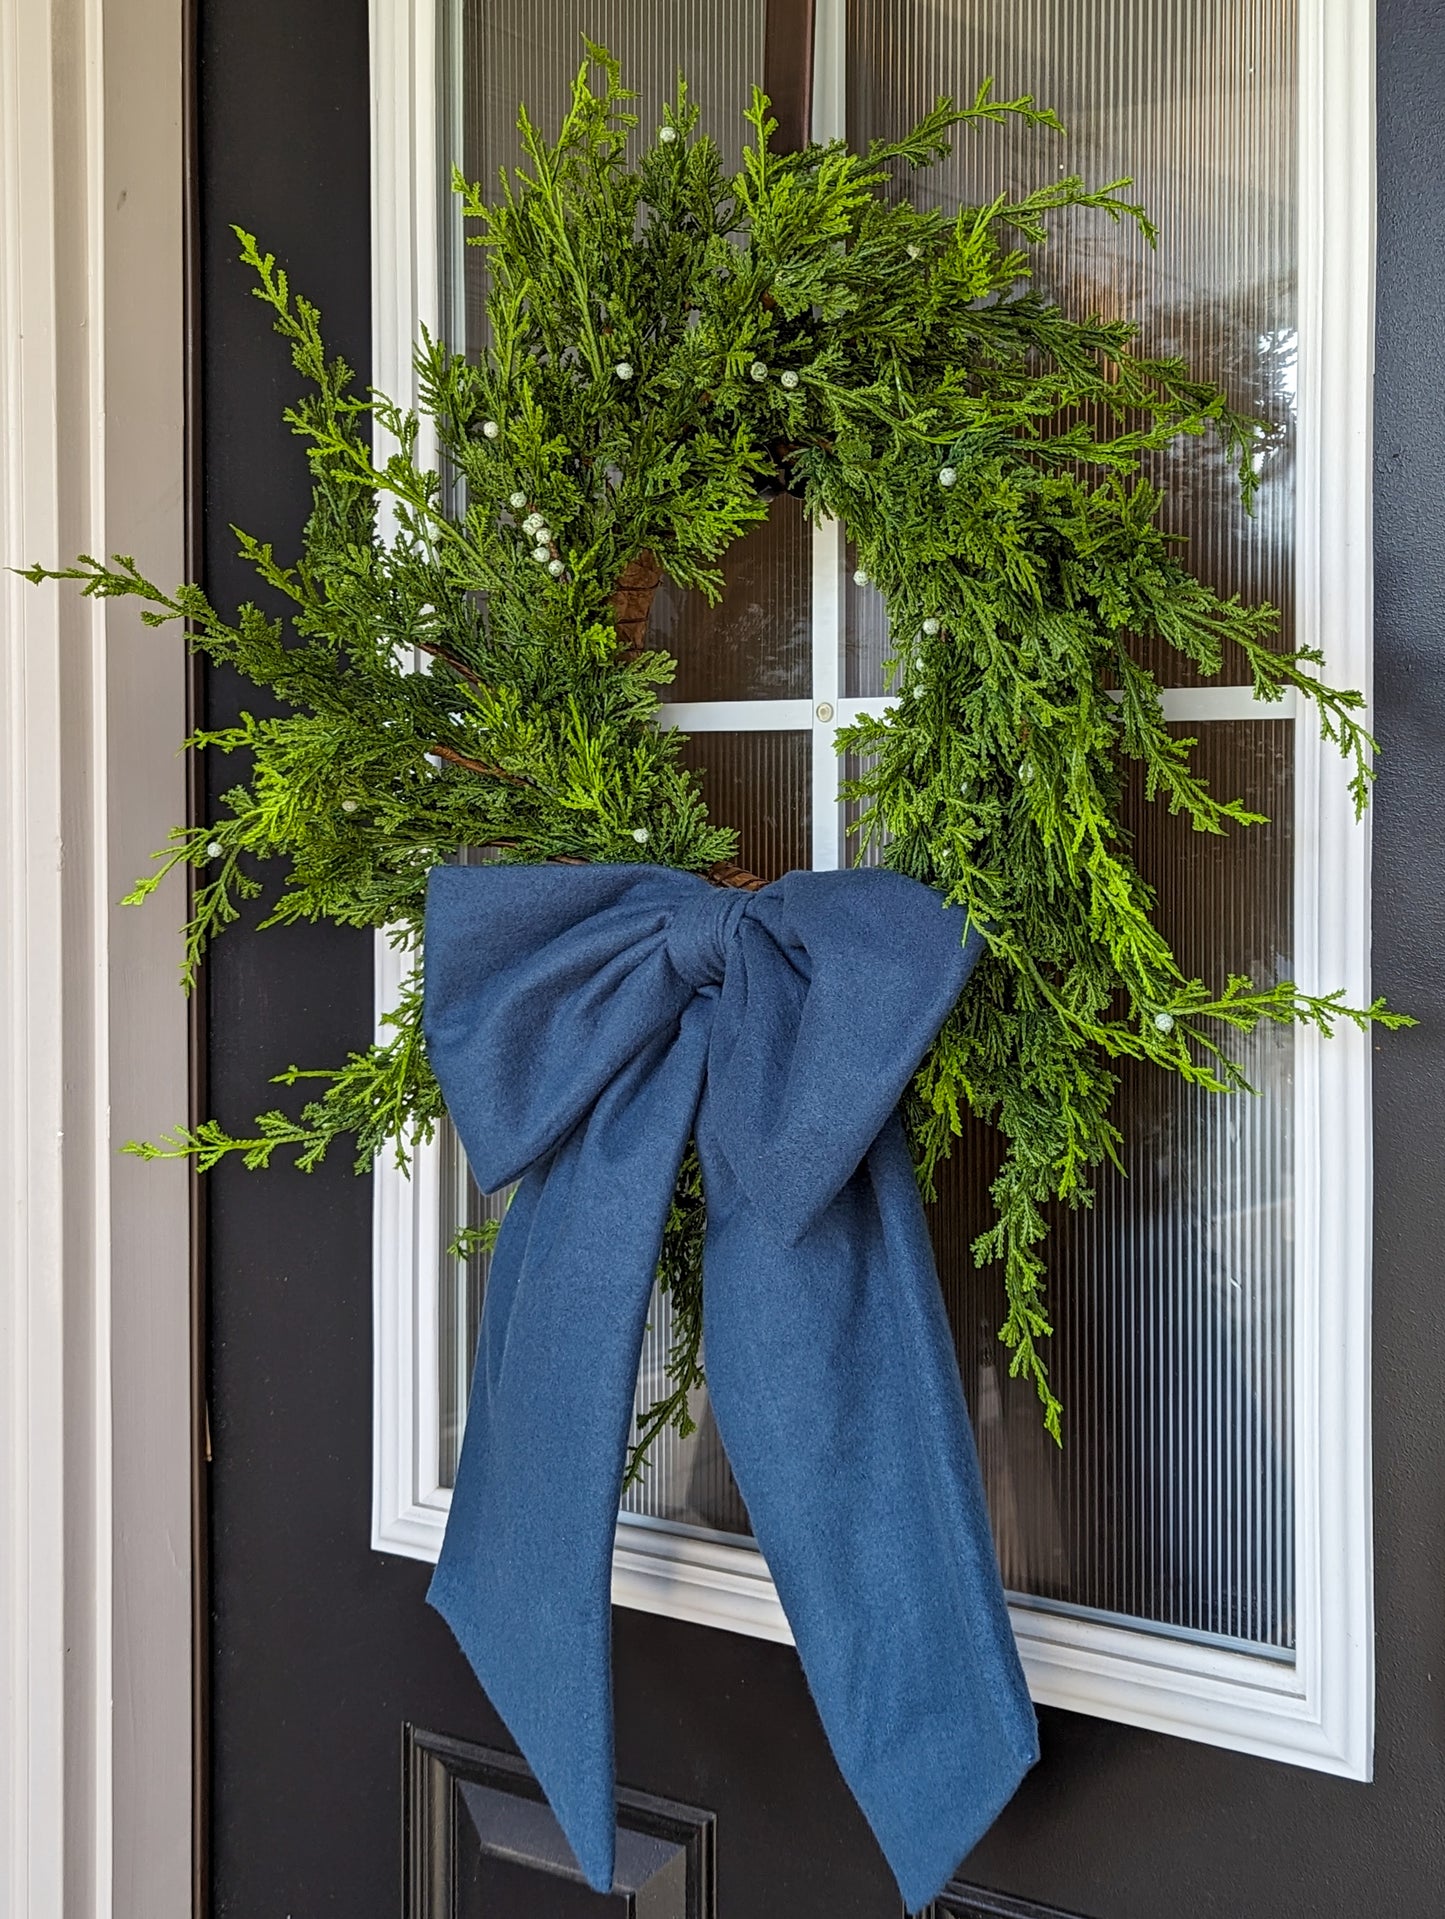 Dusty blue droopy fleece bow on juniper wreath for holiday home decorating. 